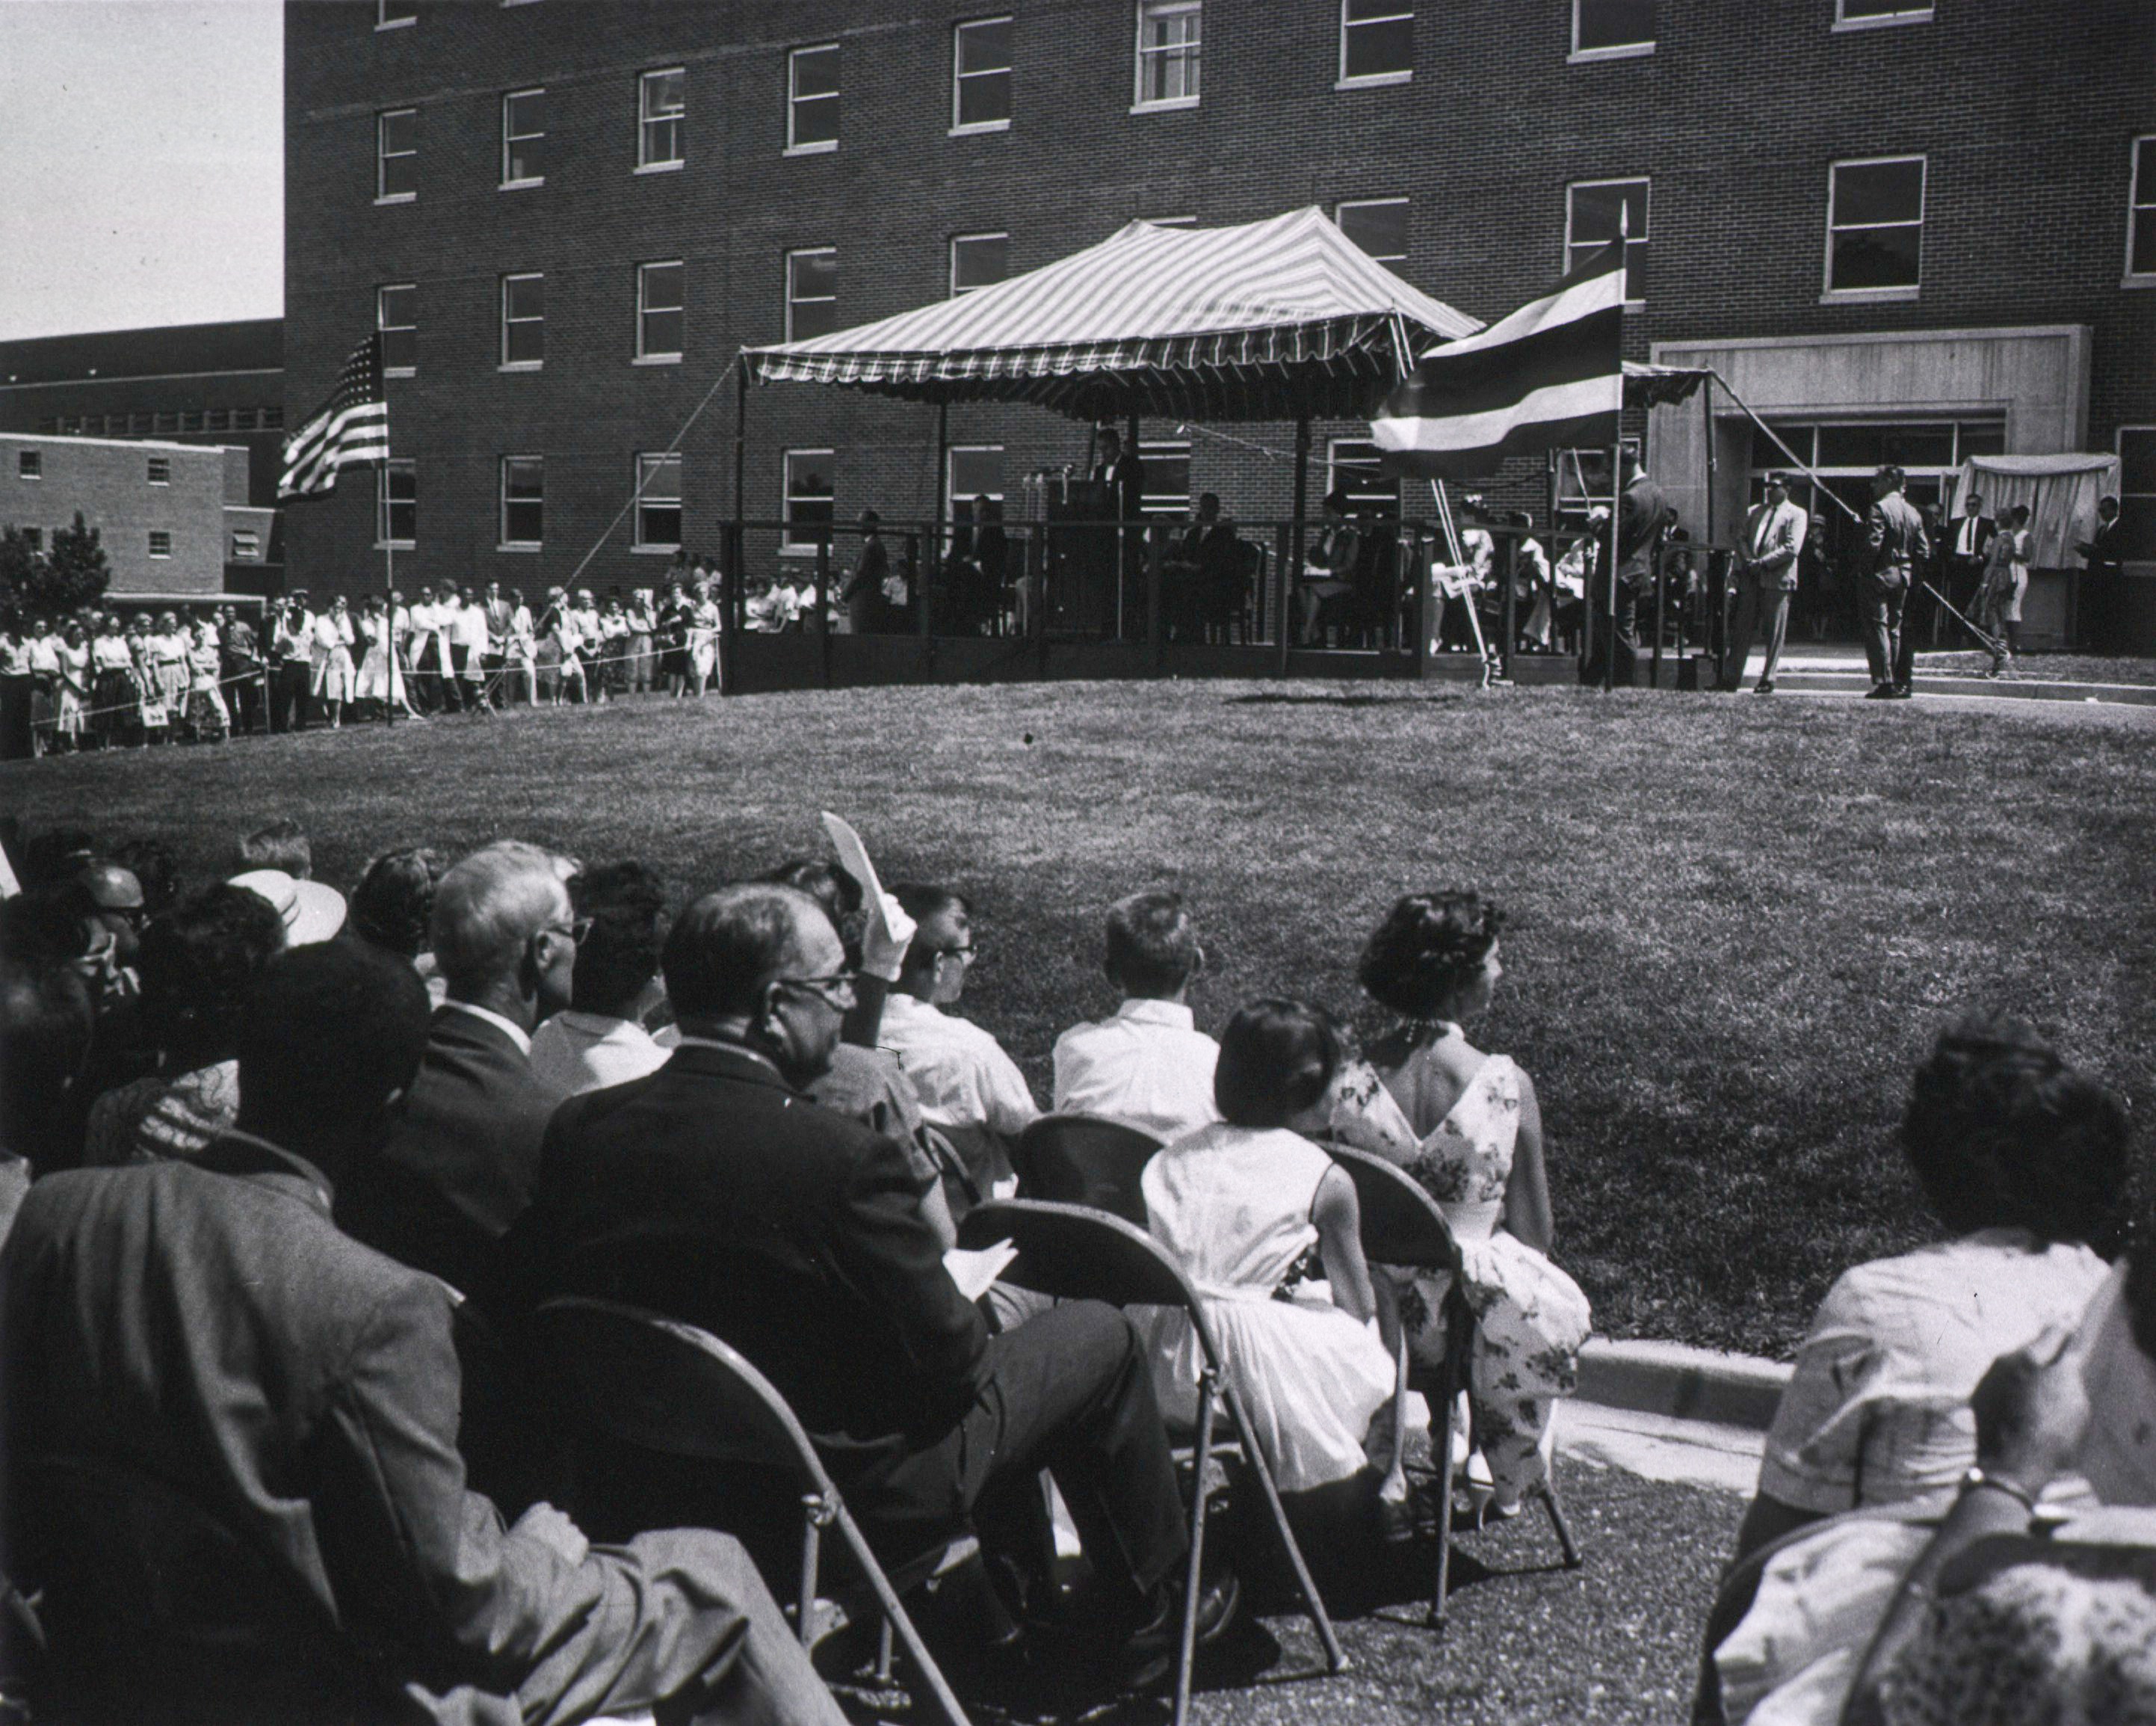 Building 29 Dedication Ceremony with people sitting in chairs on the lawn and speakers under a tent by the main entrance in 1960